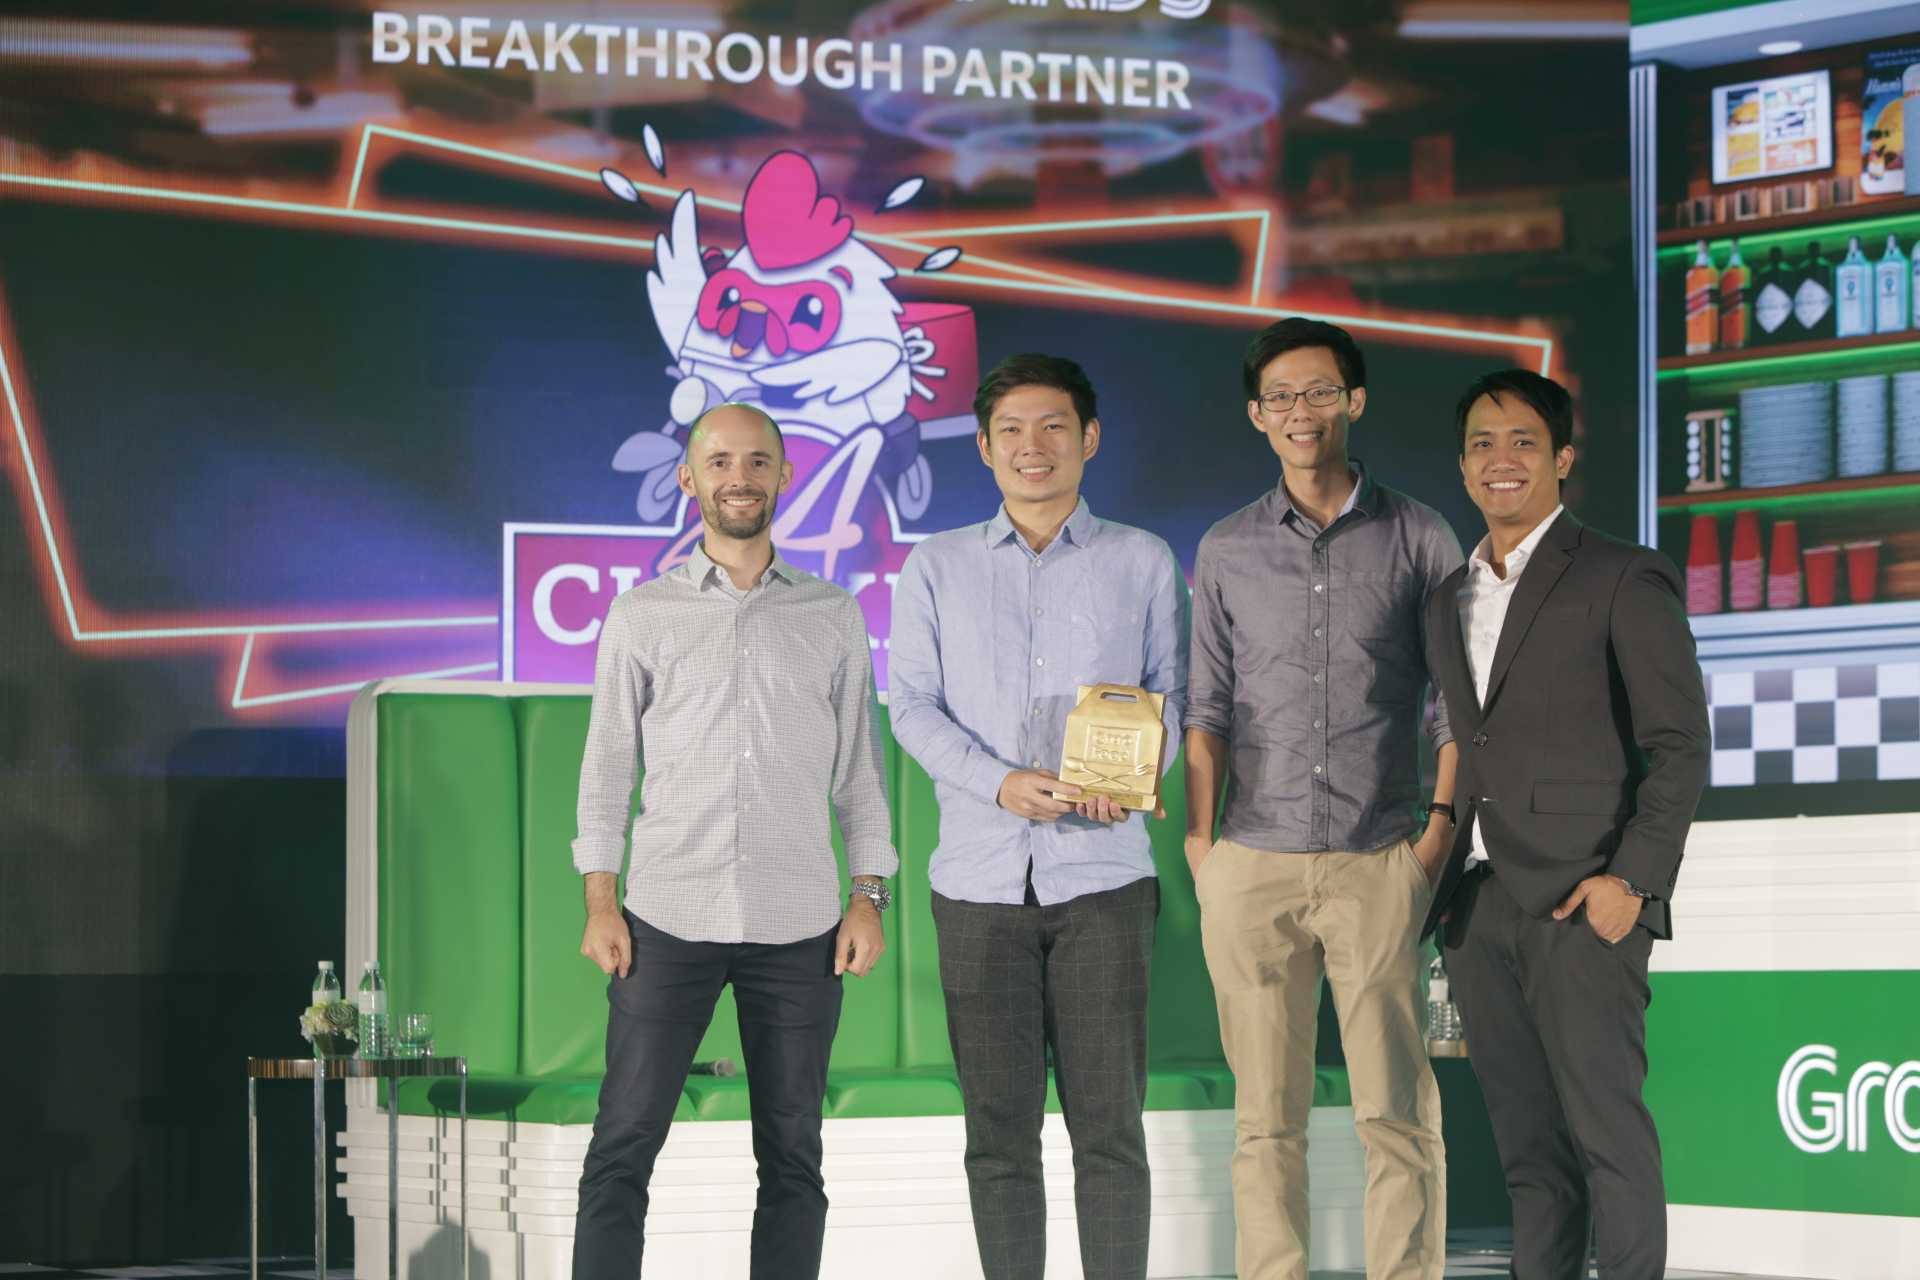 RAPID BUSINESS GROWTH. 24 Chicken owners Jeff Sy and Jeff Uy credit GrabFood for their fast sales growth. Photo by Grab PH 